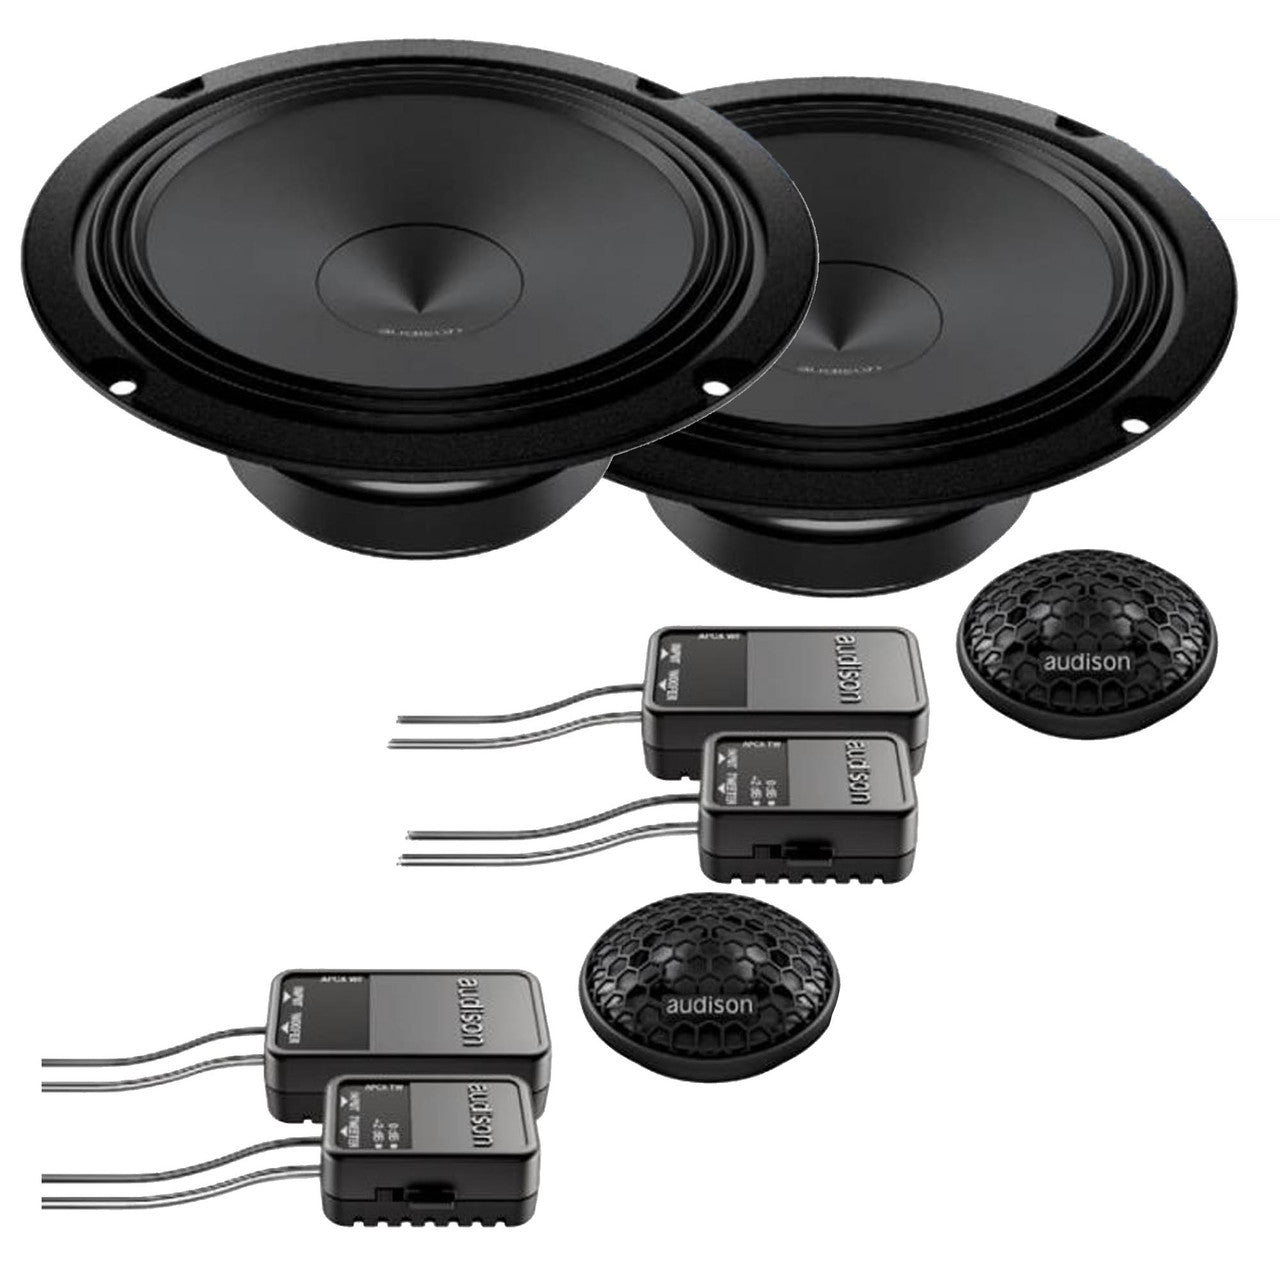 Audison F-150-15-17-5.9-NS Audison Front, Rear, Amp, and 8" Sub Bundle Compatible with 15-17 Ford F-150 Non Sony Sound Systems